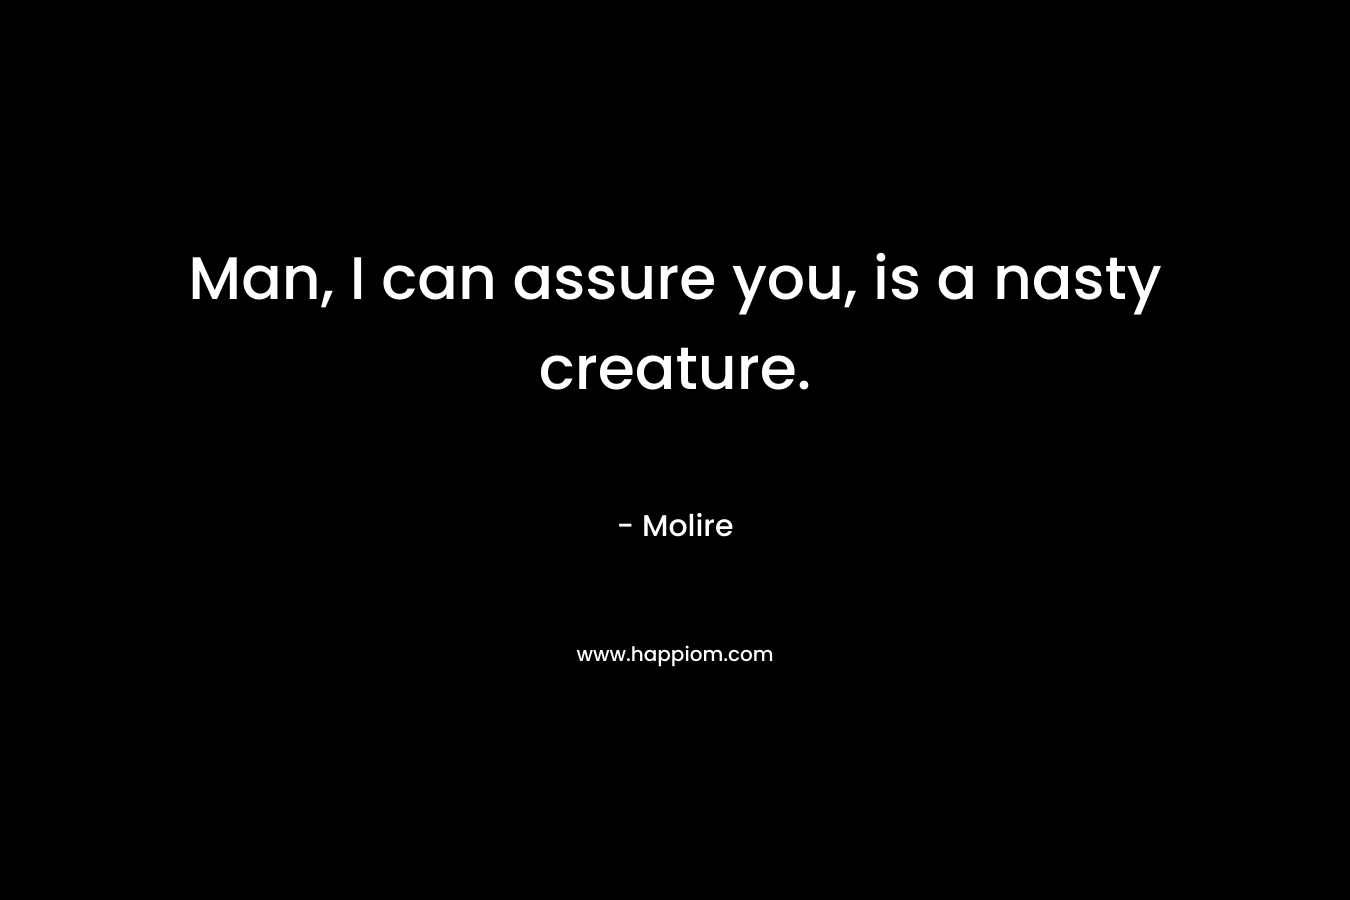 Man, I can assure you, is a nasty creature. – Molire